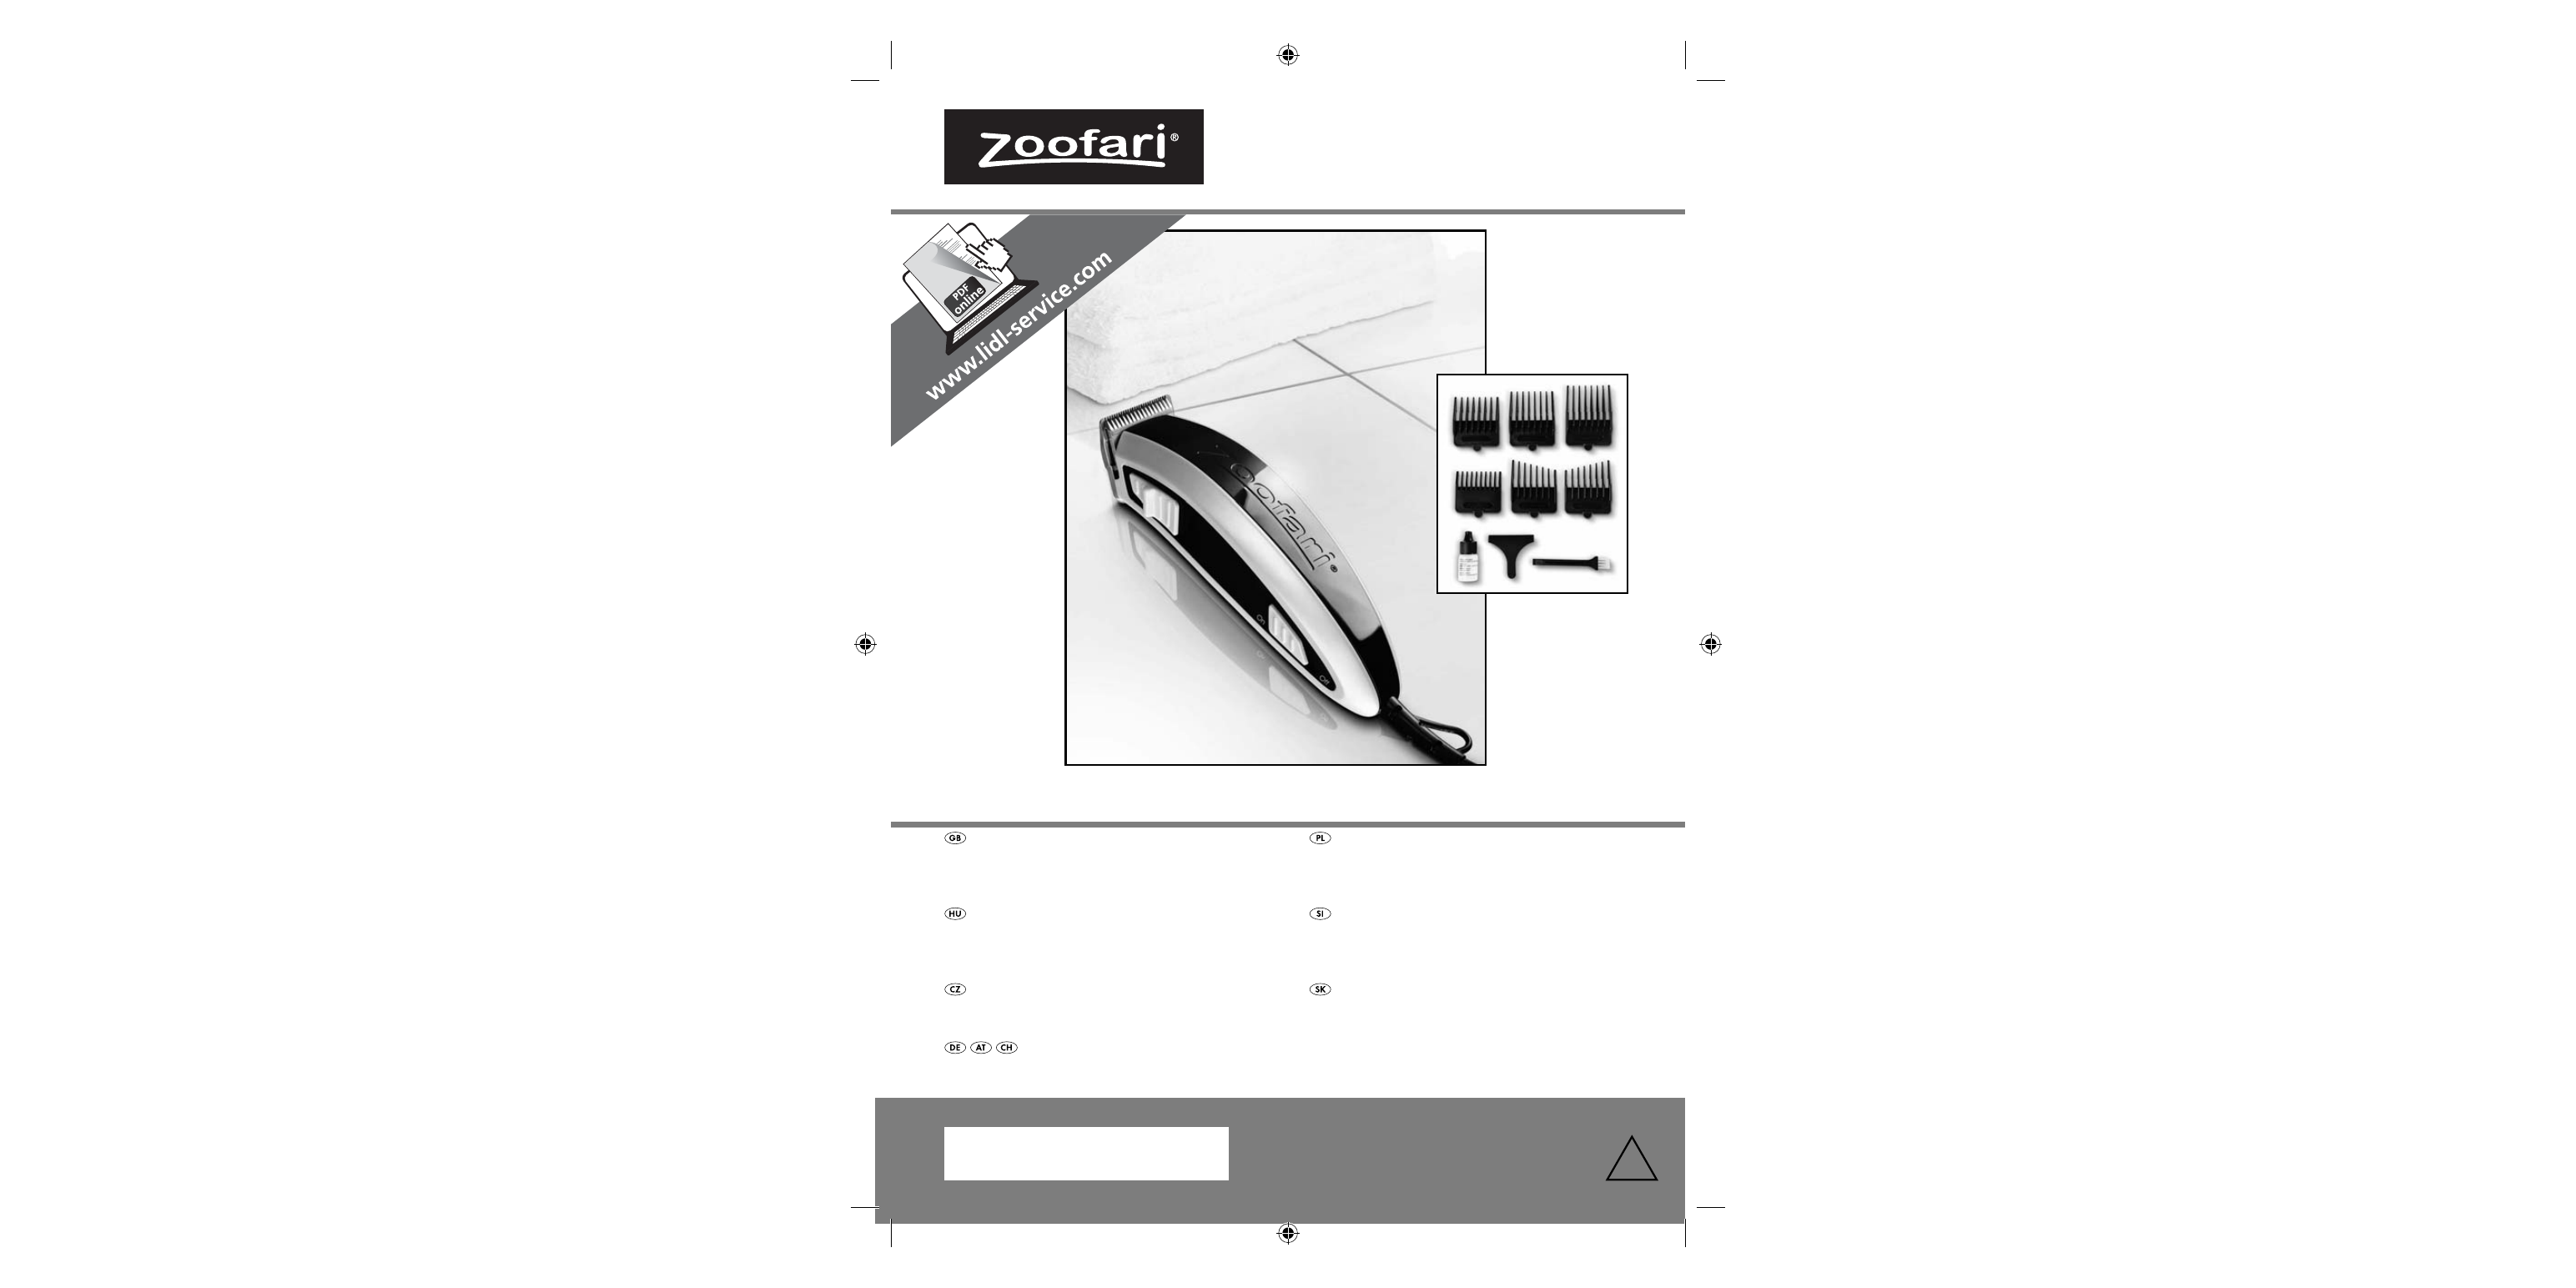 Zoofari Animal Hair Trimmer ZTSD 36 A1 User Manual | 61 pages | Also for:  Animal Clippers ZTS 10 B1